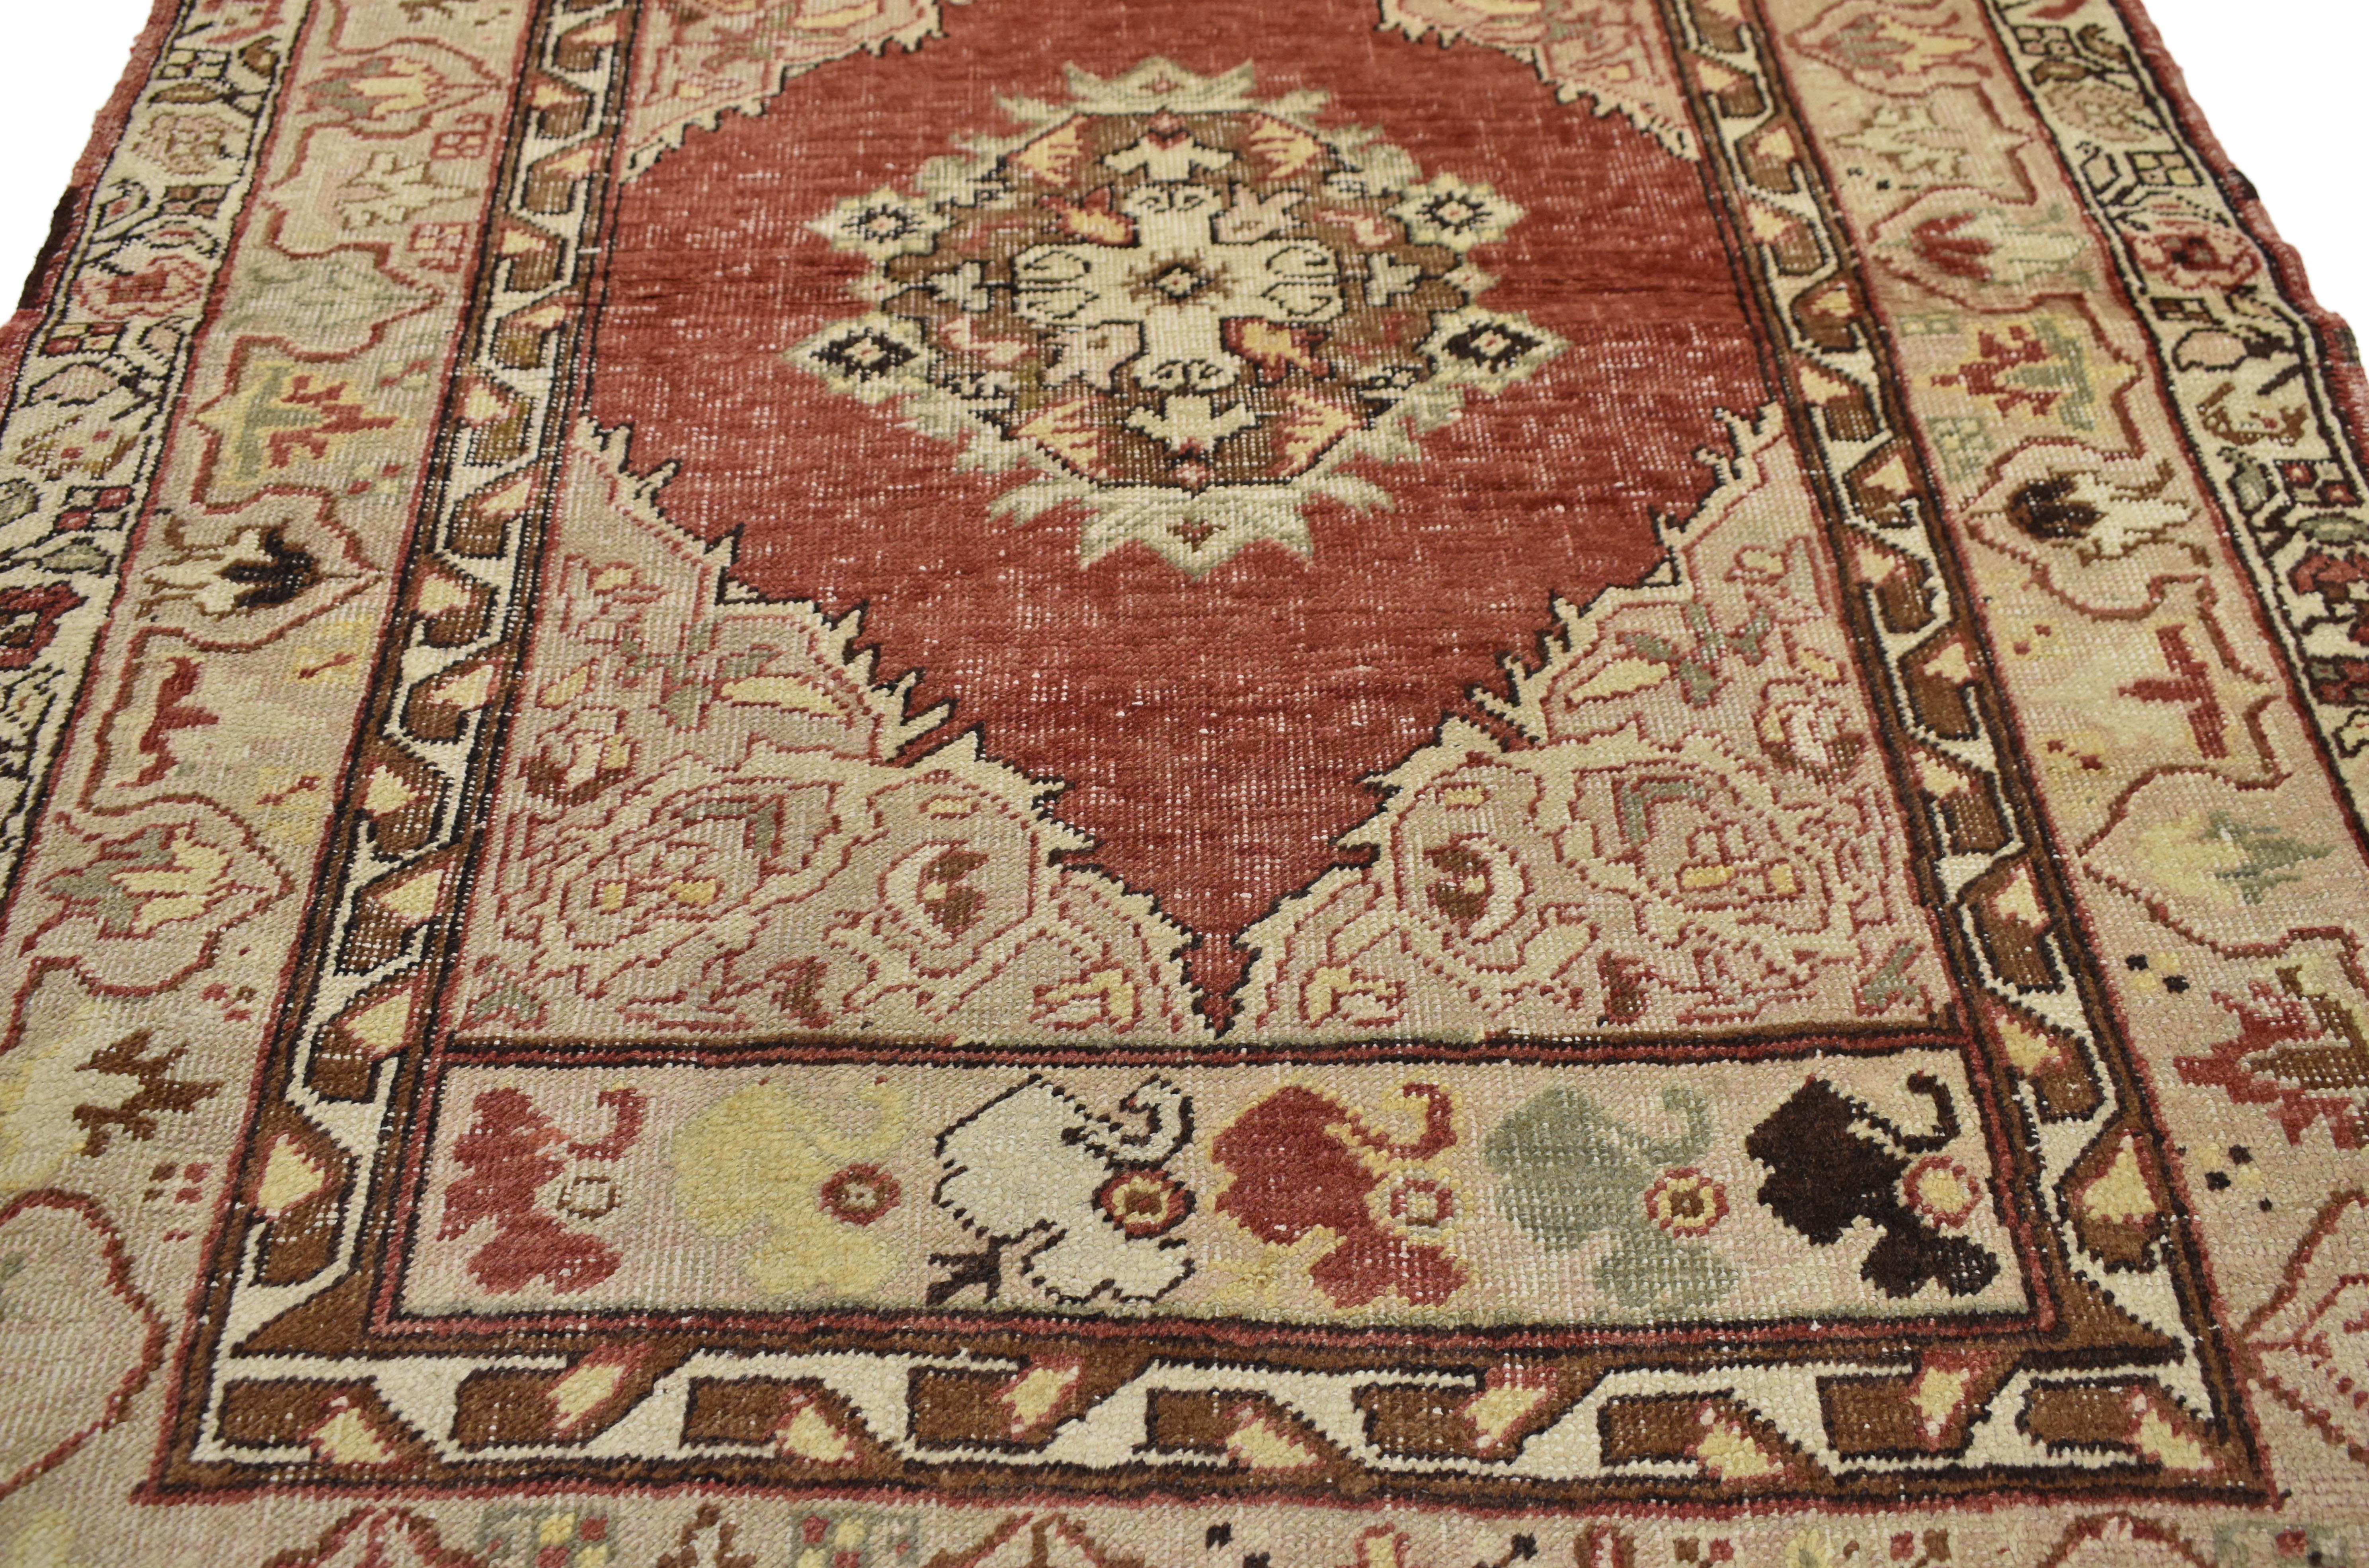 73741, rustic style vintage Turkish Oushak accent rug, entry or foyer rug. Weathered and rustic, this hand-knotted wool vintage Turkish Oushak rug features a round centre medallion on a softly worn red field, surrounded by four floral spandrels and